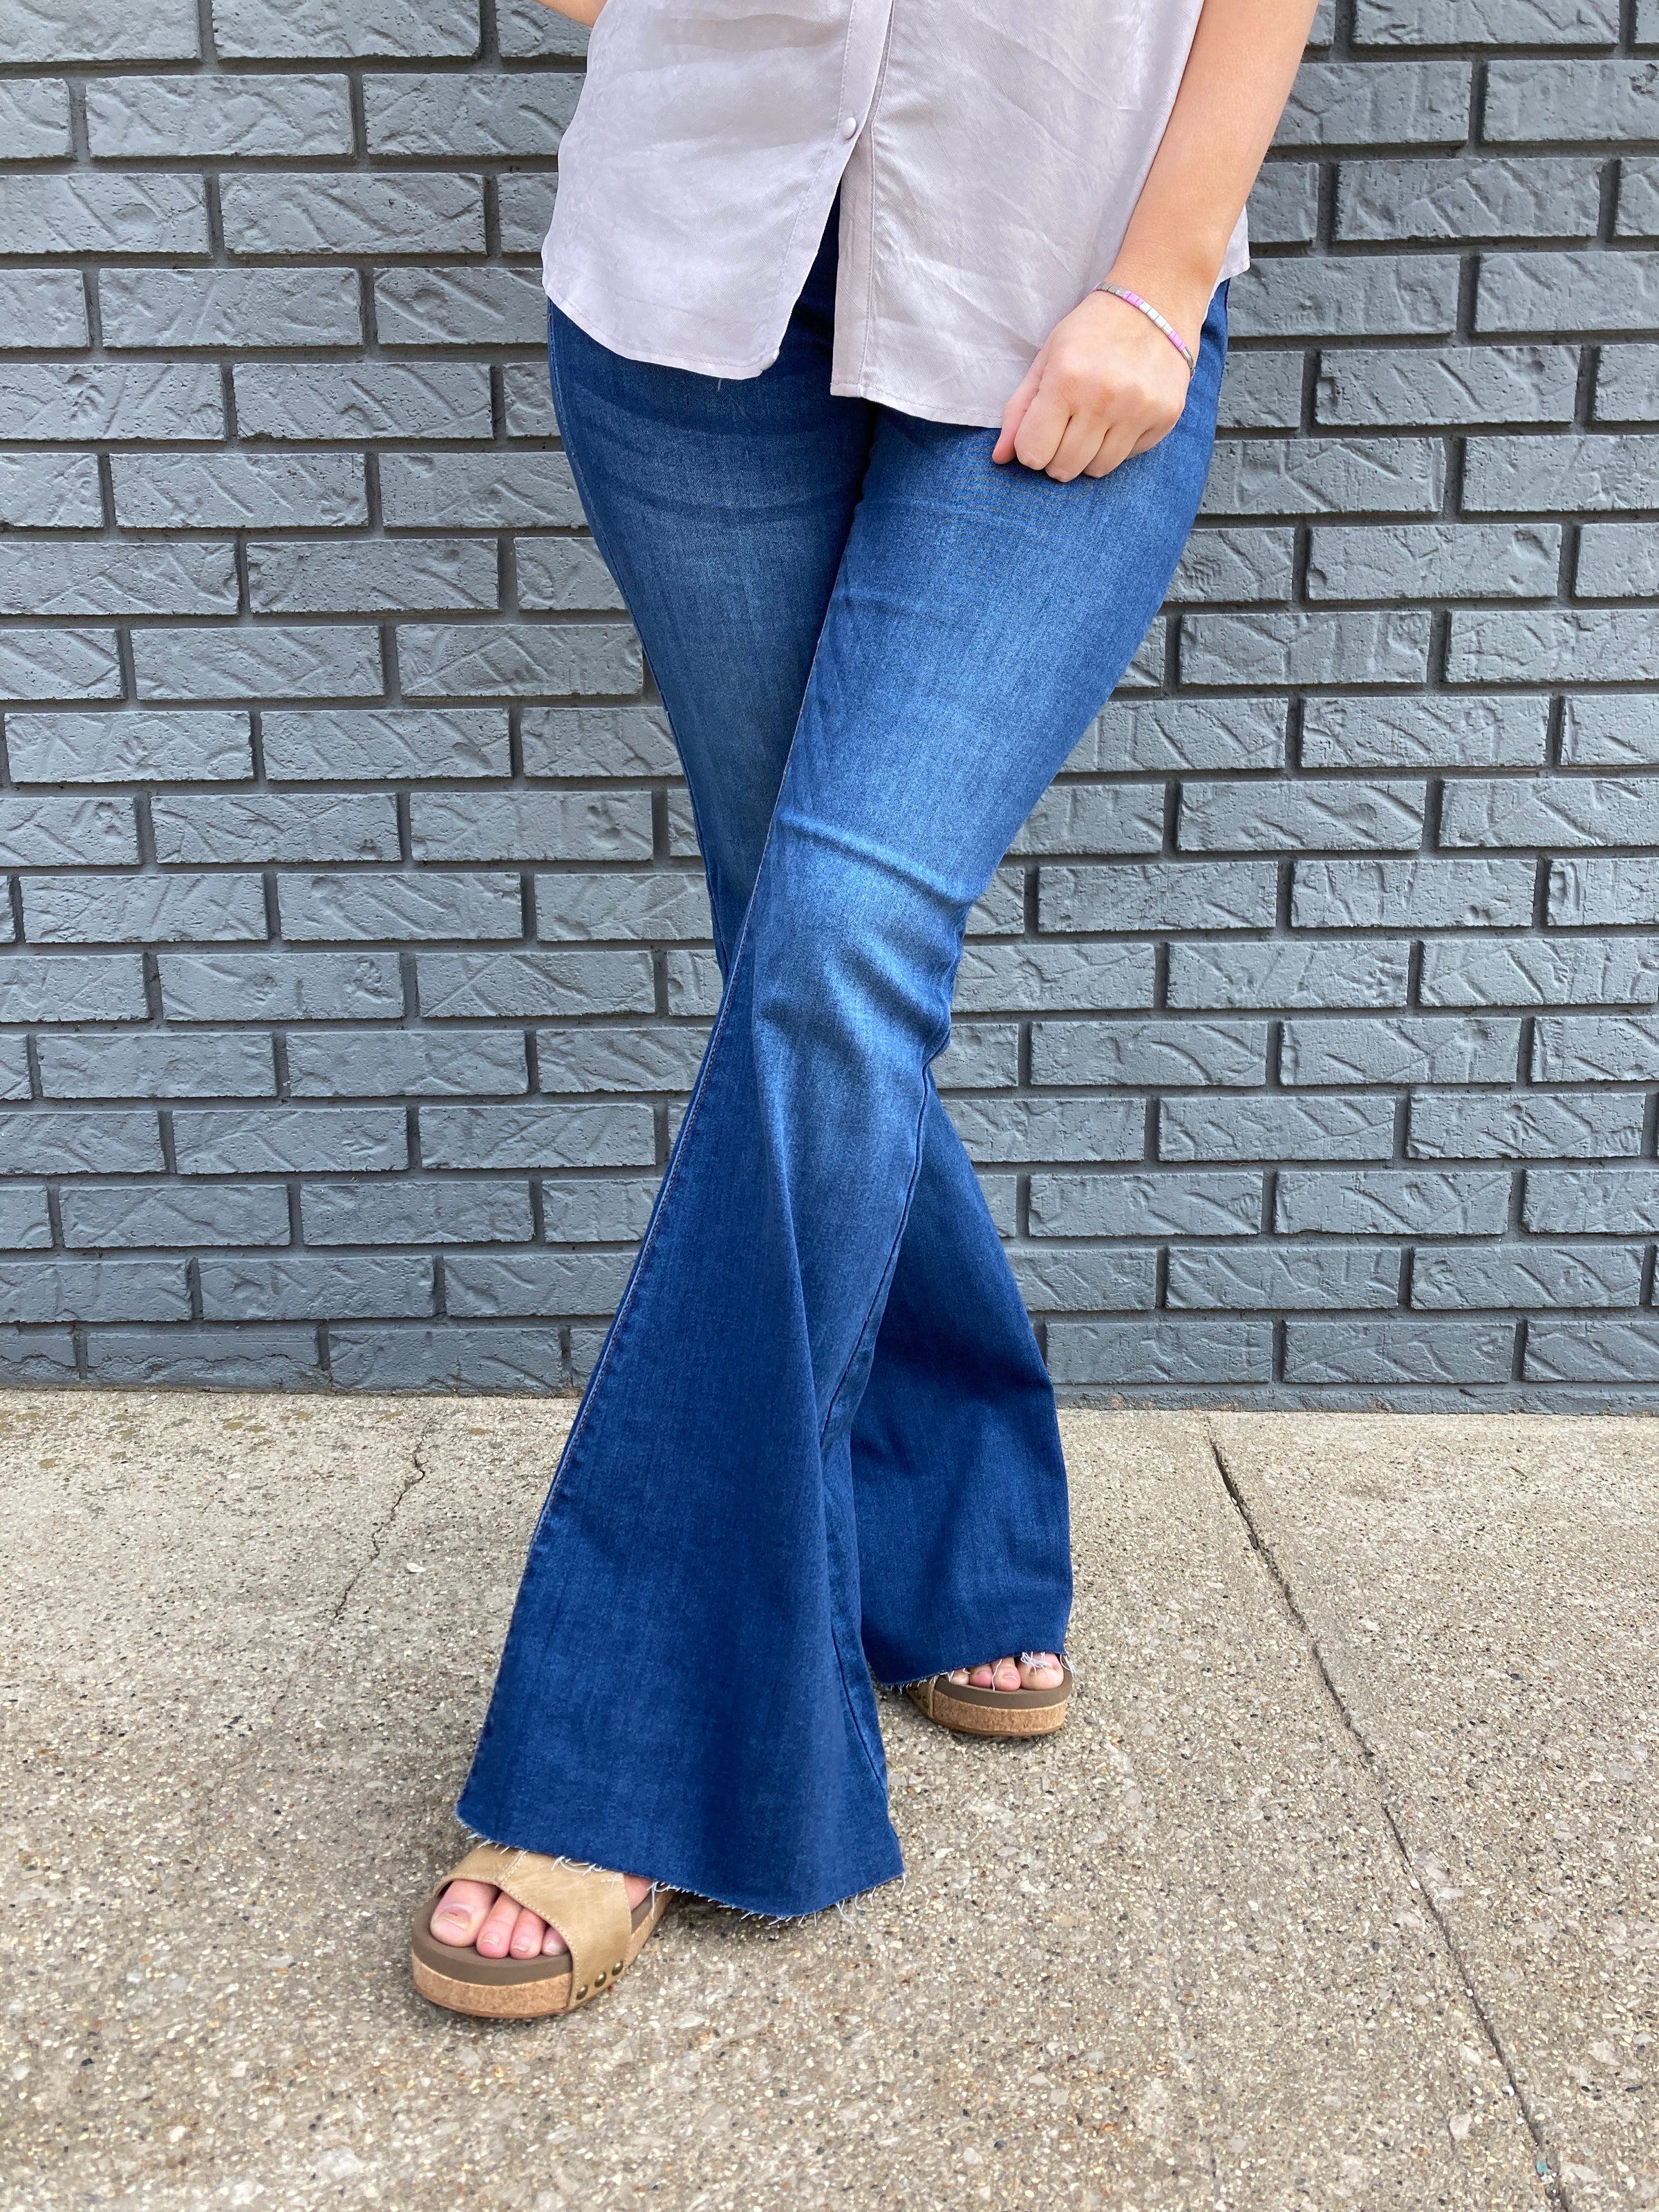 You will slide right into these super wide bell bottom jeans. They are ultra comfy and are paired with a pair of brown platform sandals.